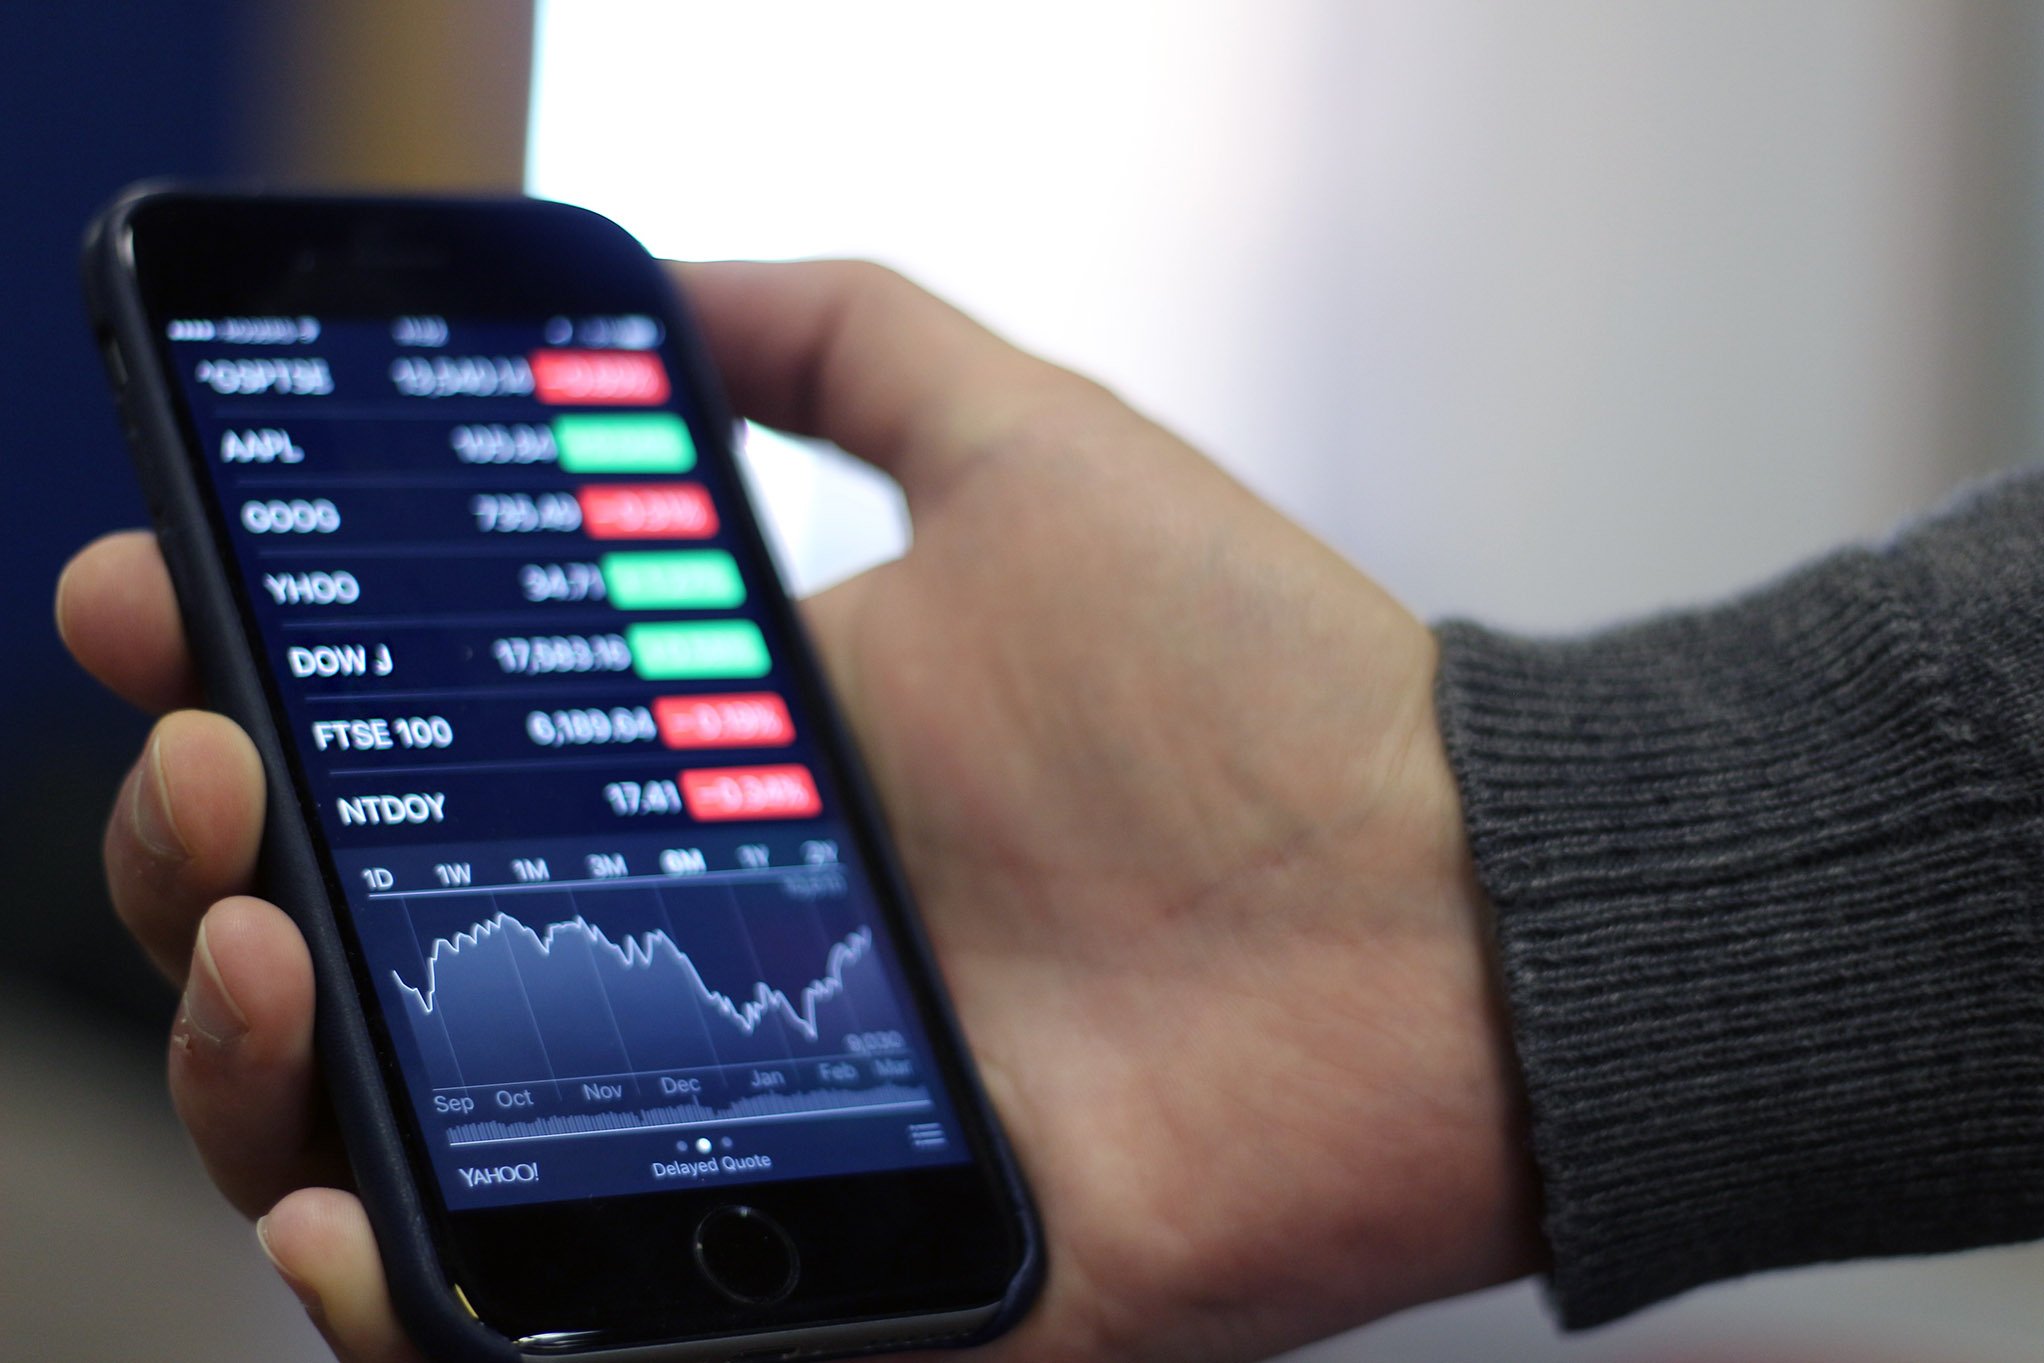 How to use Stocks for iPhone and iPad